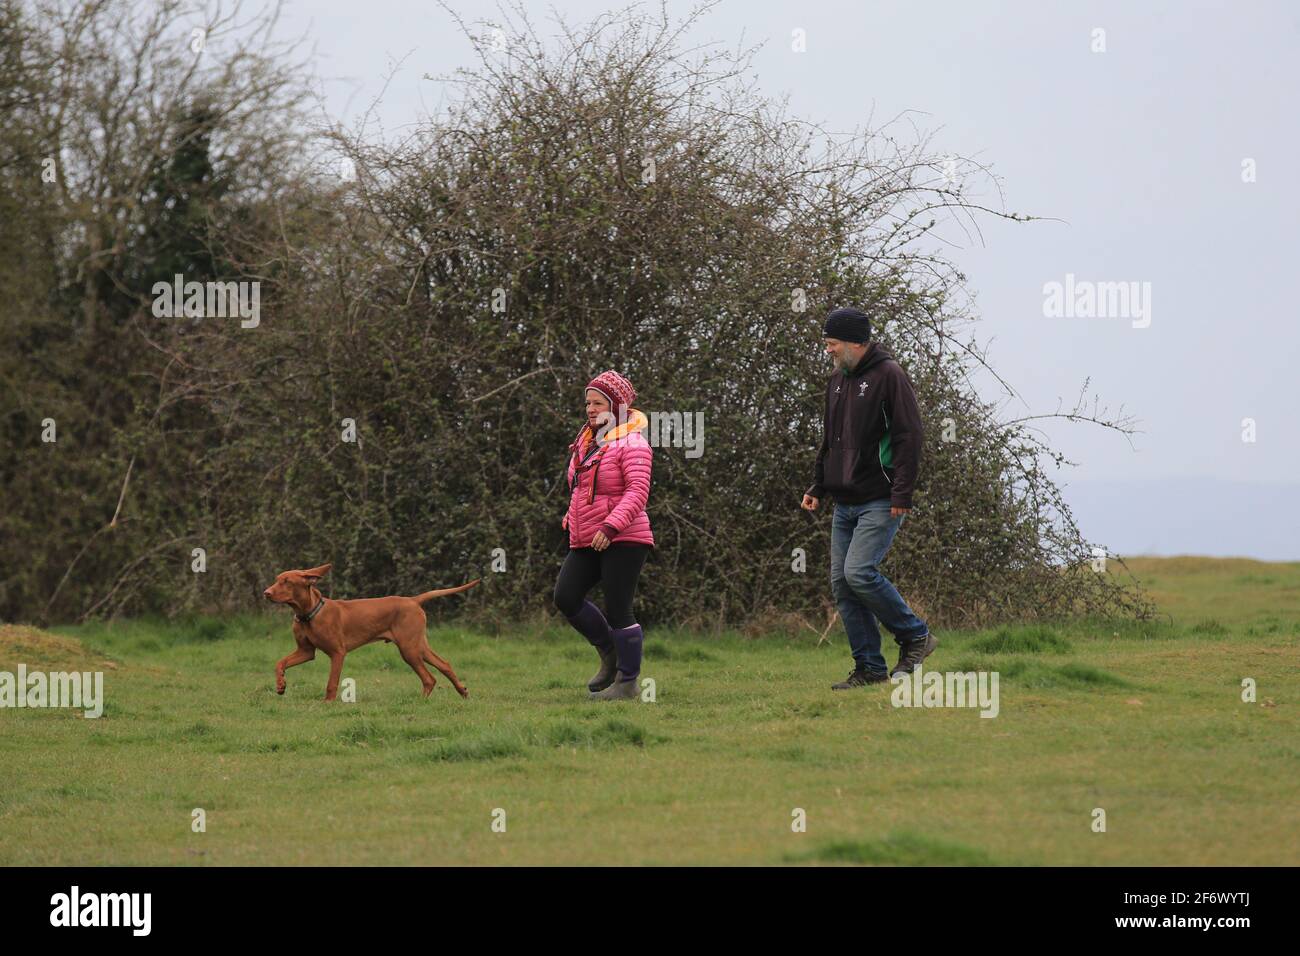 Stroud, UK, 3rd April, 2021. UK Weather. Overcast skies with chilly winds as the walkers on Rodborough Common wrap up after warm temperatures earlier in the week. Gloucestershire. UK. Stock Photo